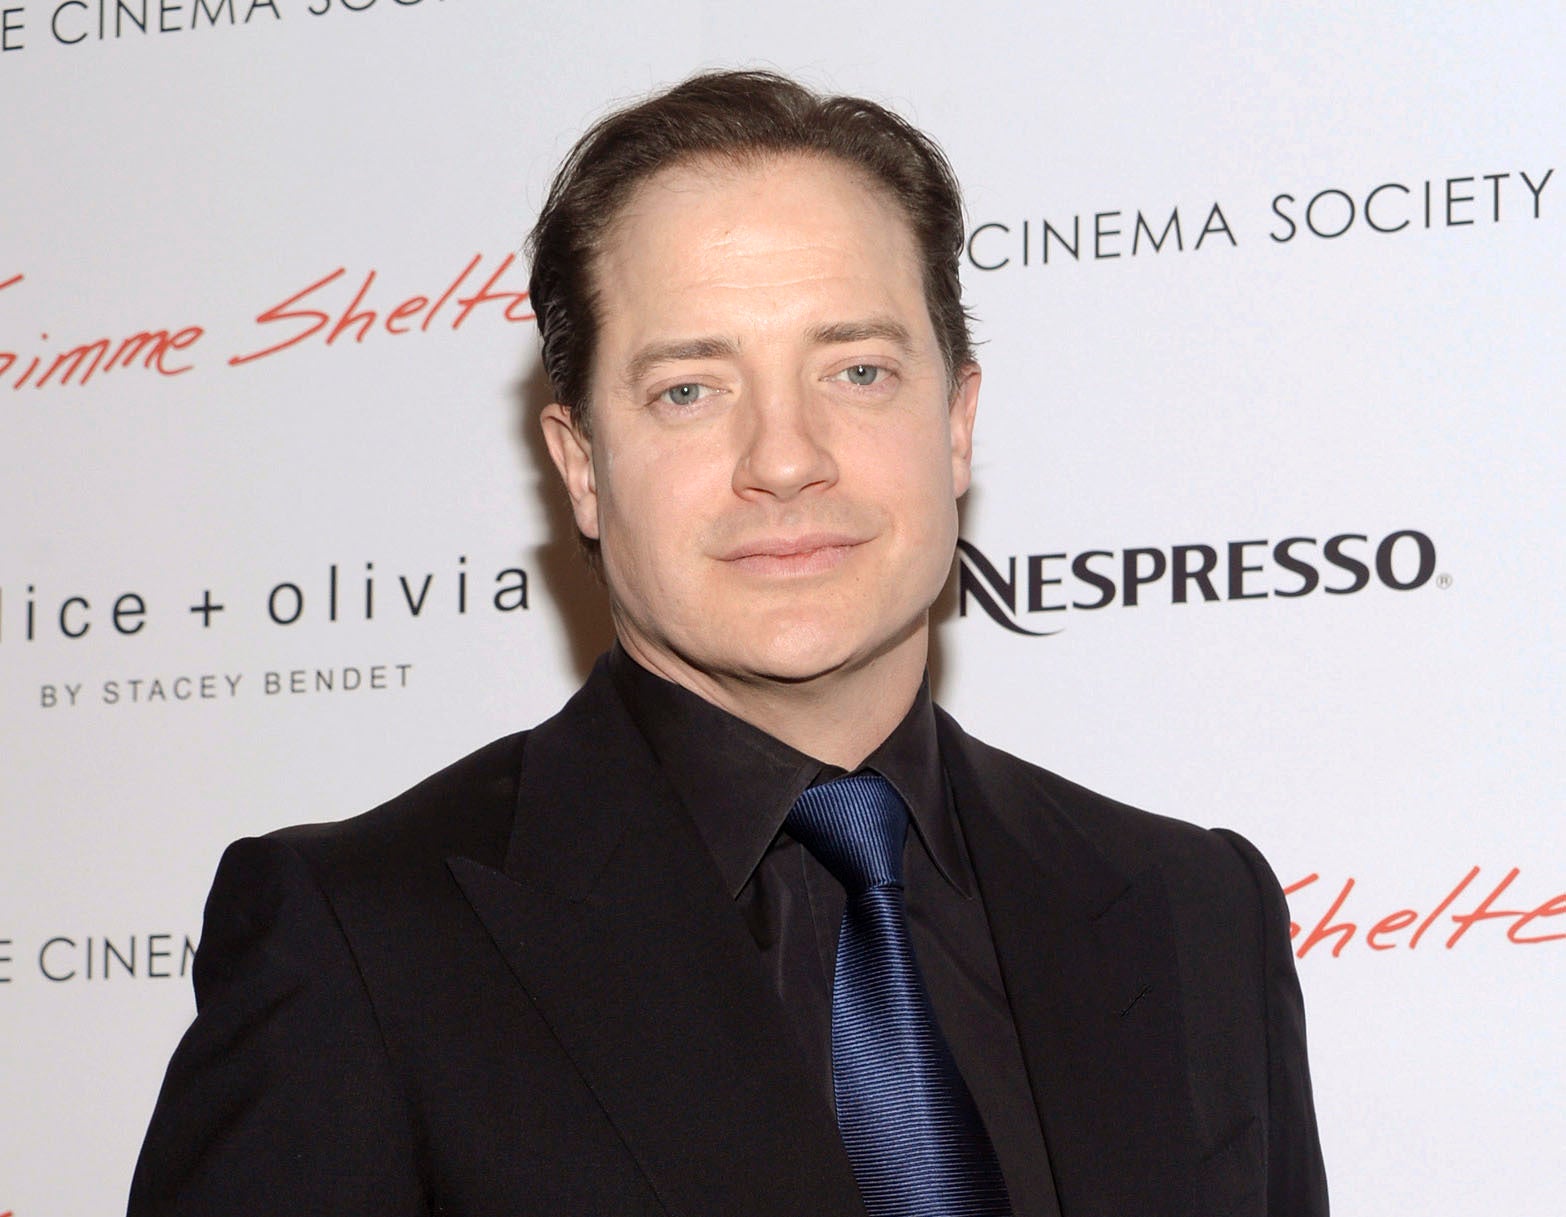 Brendan Fraser Archives - Big Gay Picture Show